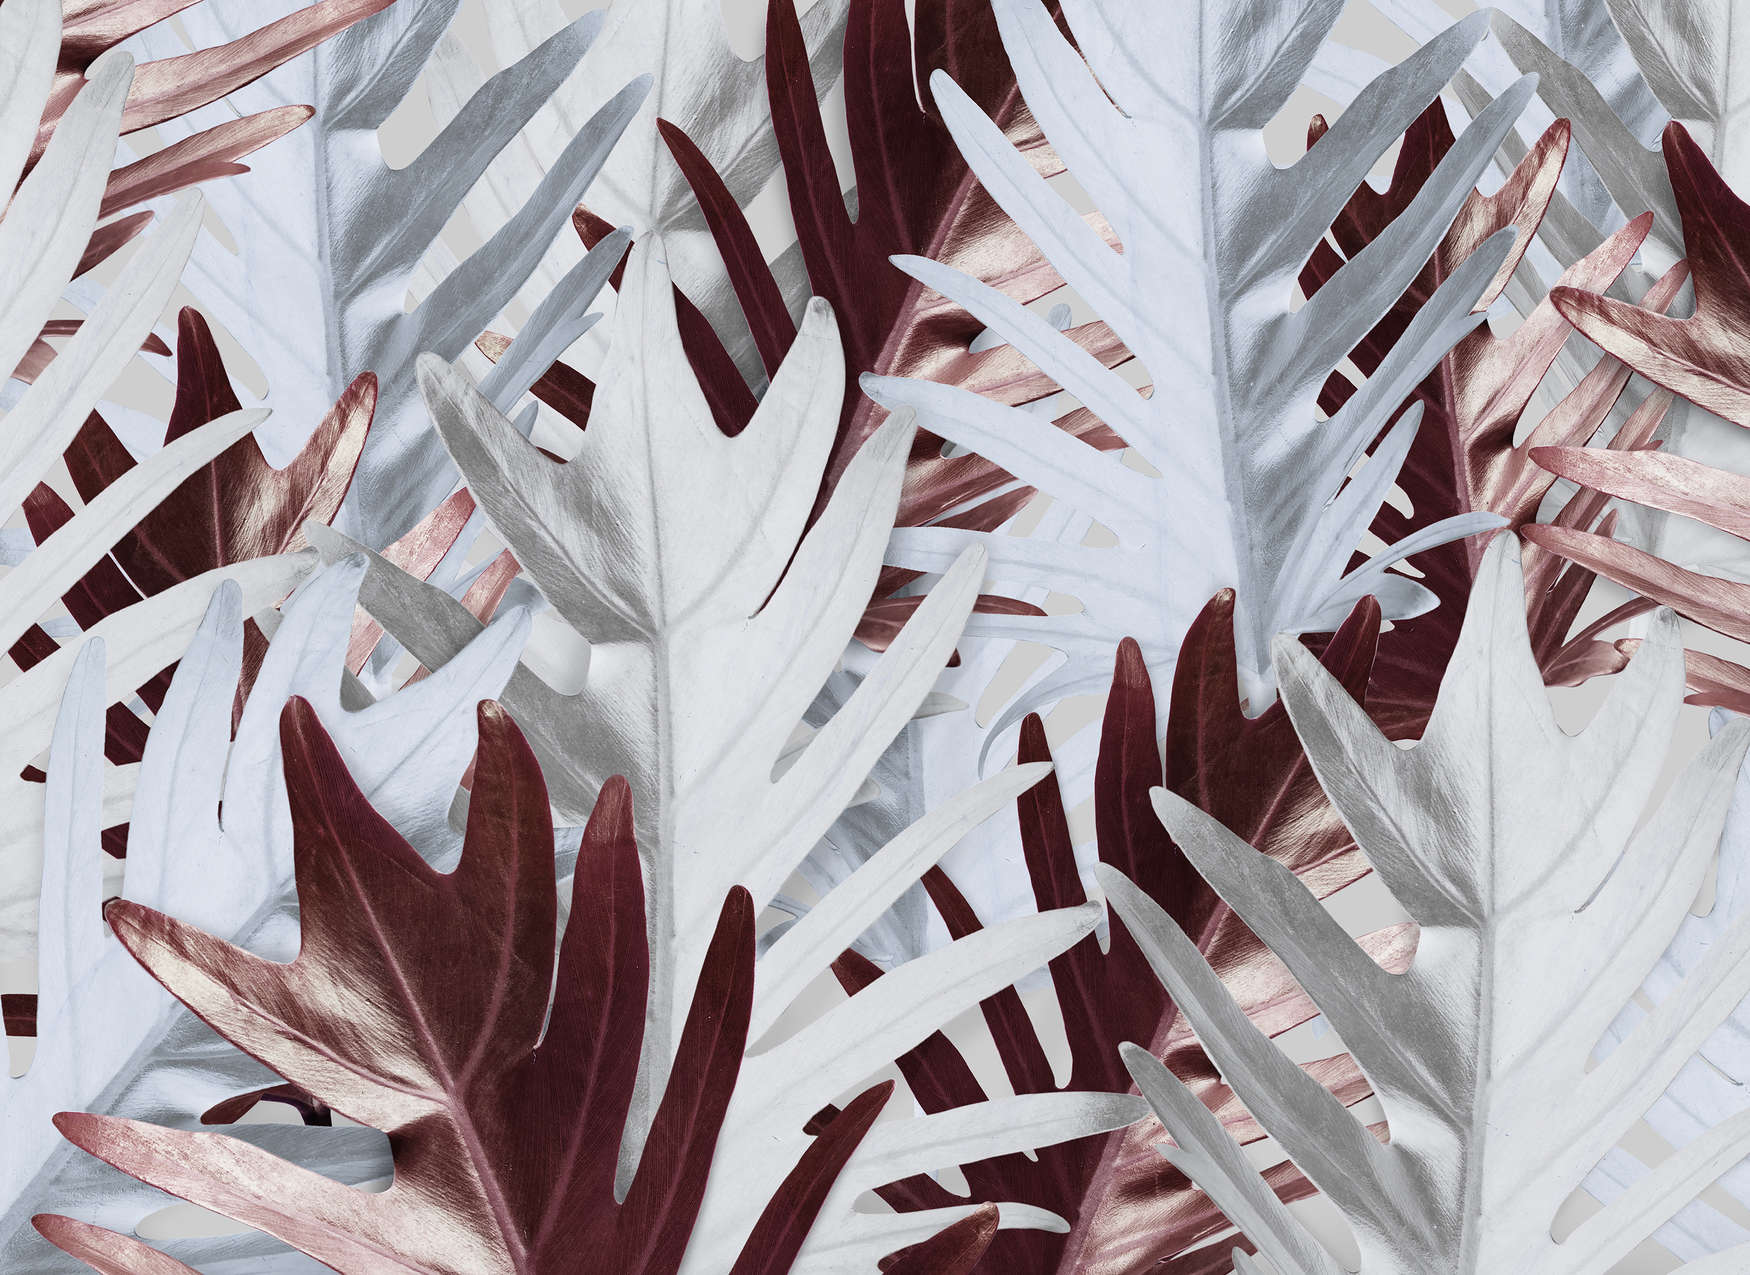             Photo wallpaper with jungle leaves in soft shades - Red, White
        